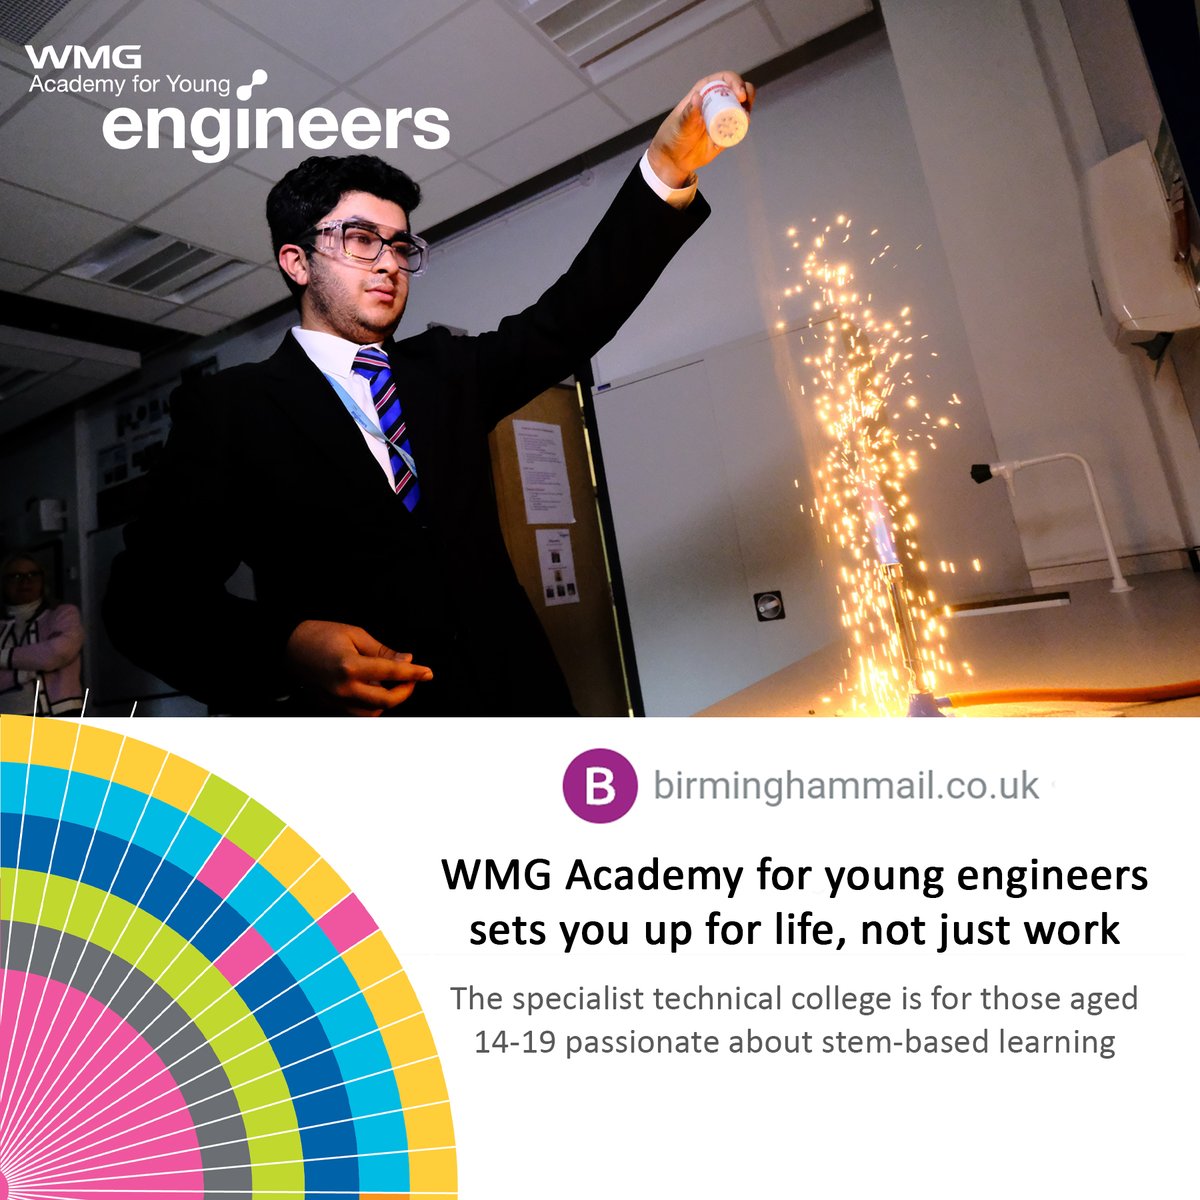 Head over to Birmingham Live to read the article on WMG Academy
#WMGAcademy #WMGAcademySolihull #YoungEngineers #BimrminghamMail 
rb.gy/nicng3